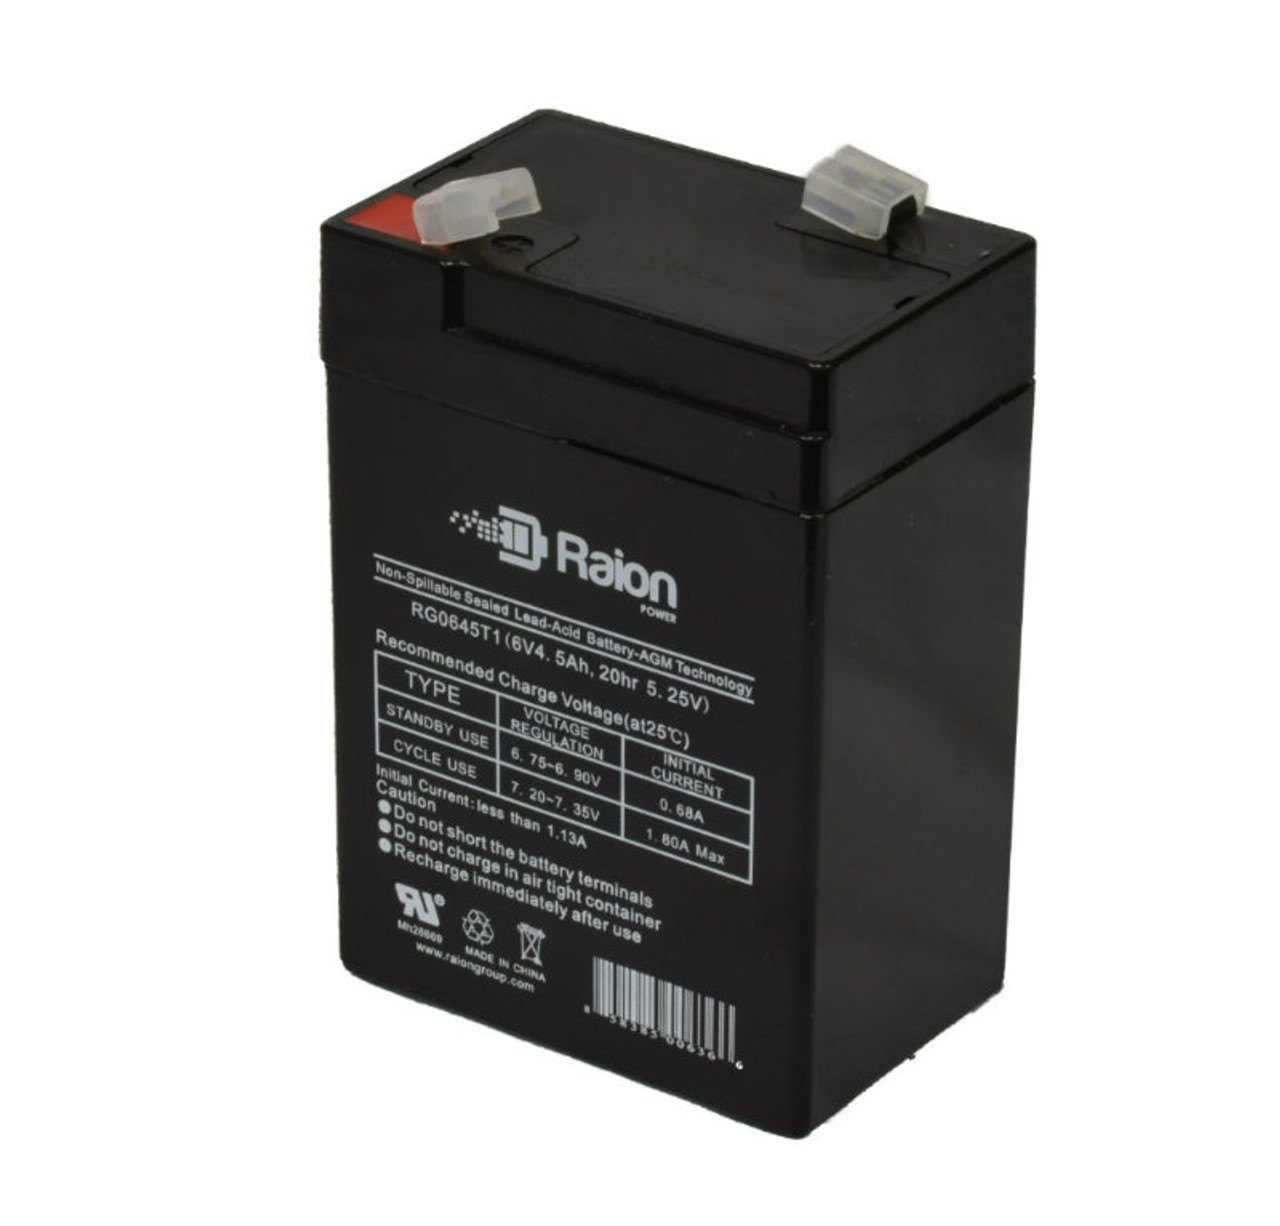 Raion Power RG0645T1 6V 4.5Ah Replacement Battery Cartridge for Lithonia ELBC06075